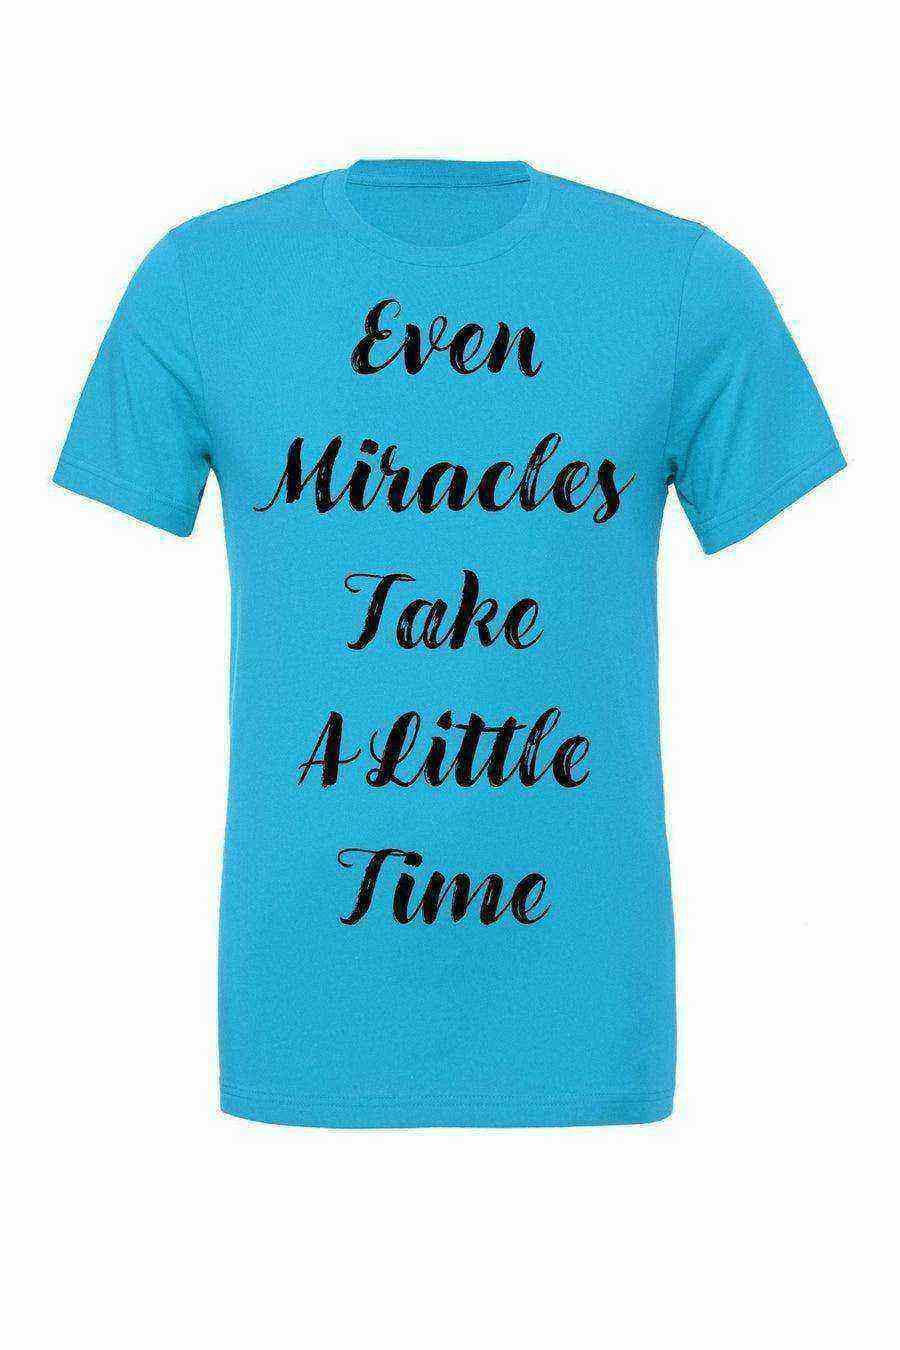 Toddler | Cinderella Tee | Even Miracles Take A Little Time - Dylan's Tees